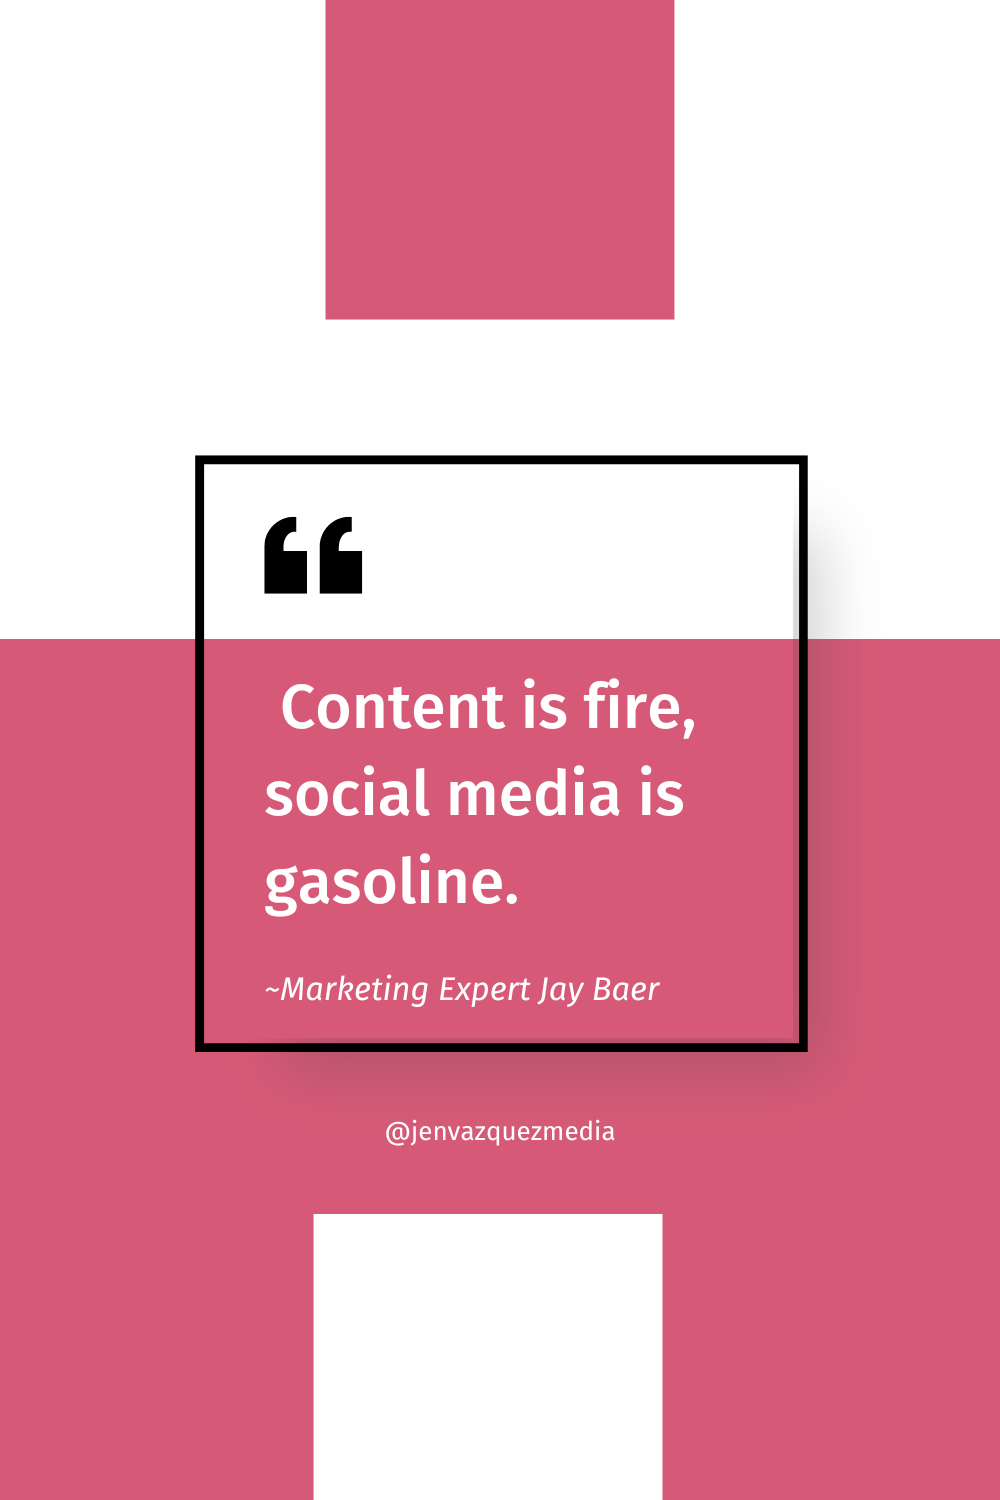 quote content is fire, social media is gasoline. jay baer -- for search vs social marketing by Jen Vazquez Media